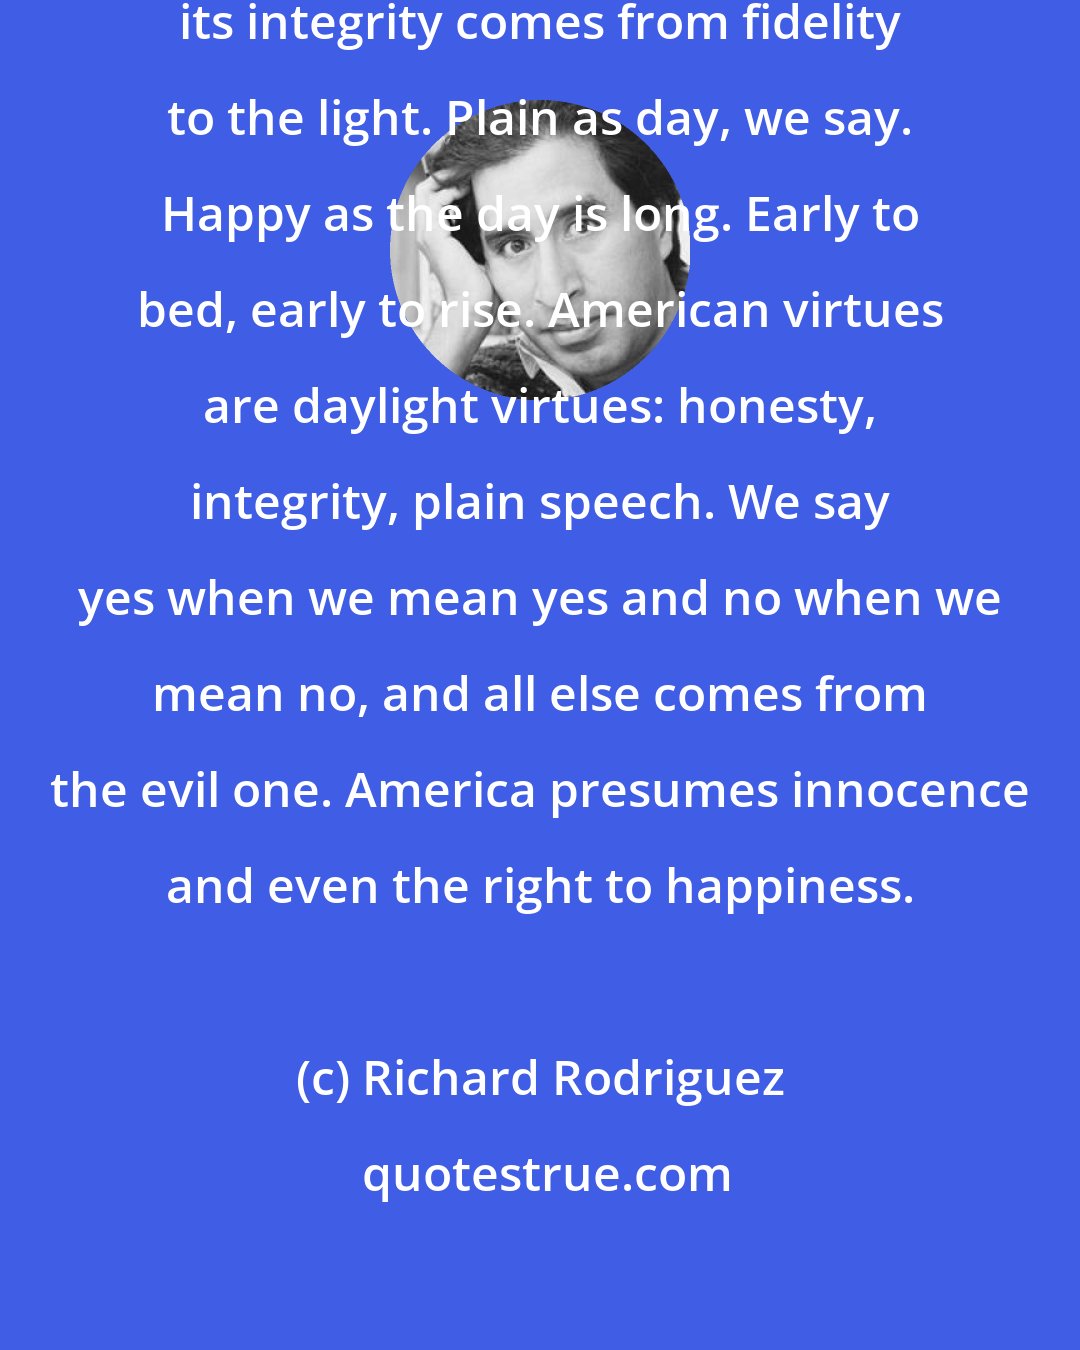 Richard Rodriguez: The genius of American culture and its integrity comes from fidelity to the light. Plain as day, we say. Happy as the day is long. Early to bed, early to rise. American virtues are daylight virtues: honesty, integrity, plain speech. We say yes when we mean yes and no when we mean no, and all else comes from the evil one. America presumes innocence and even the right to happiness.